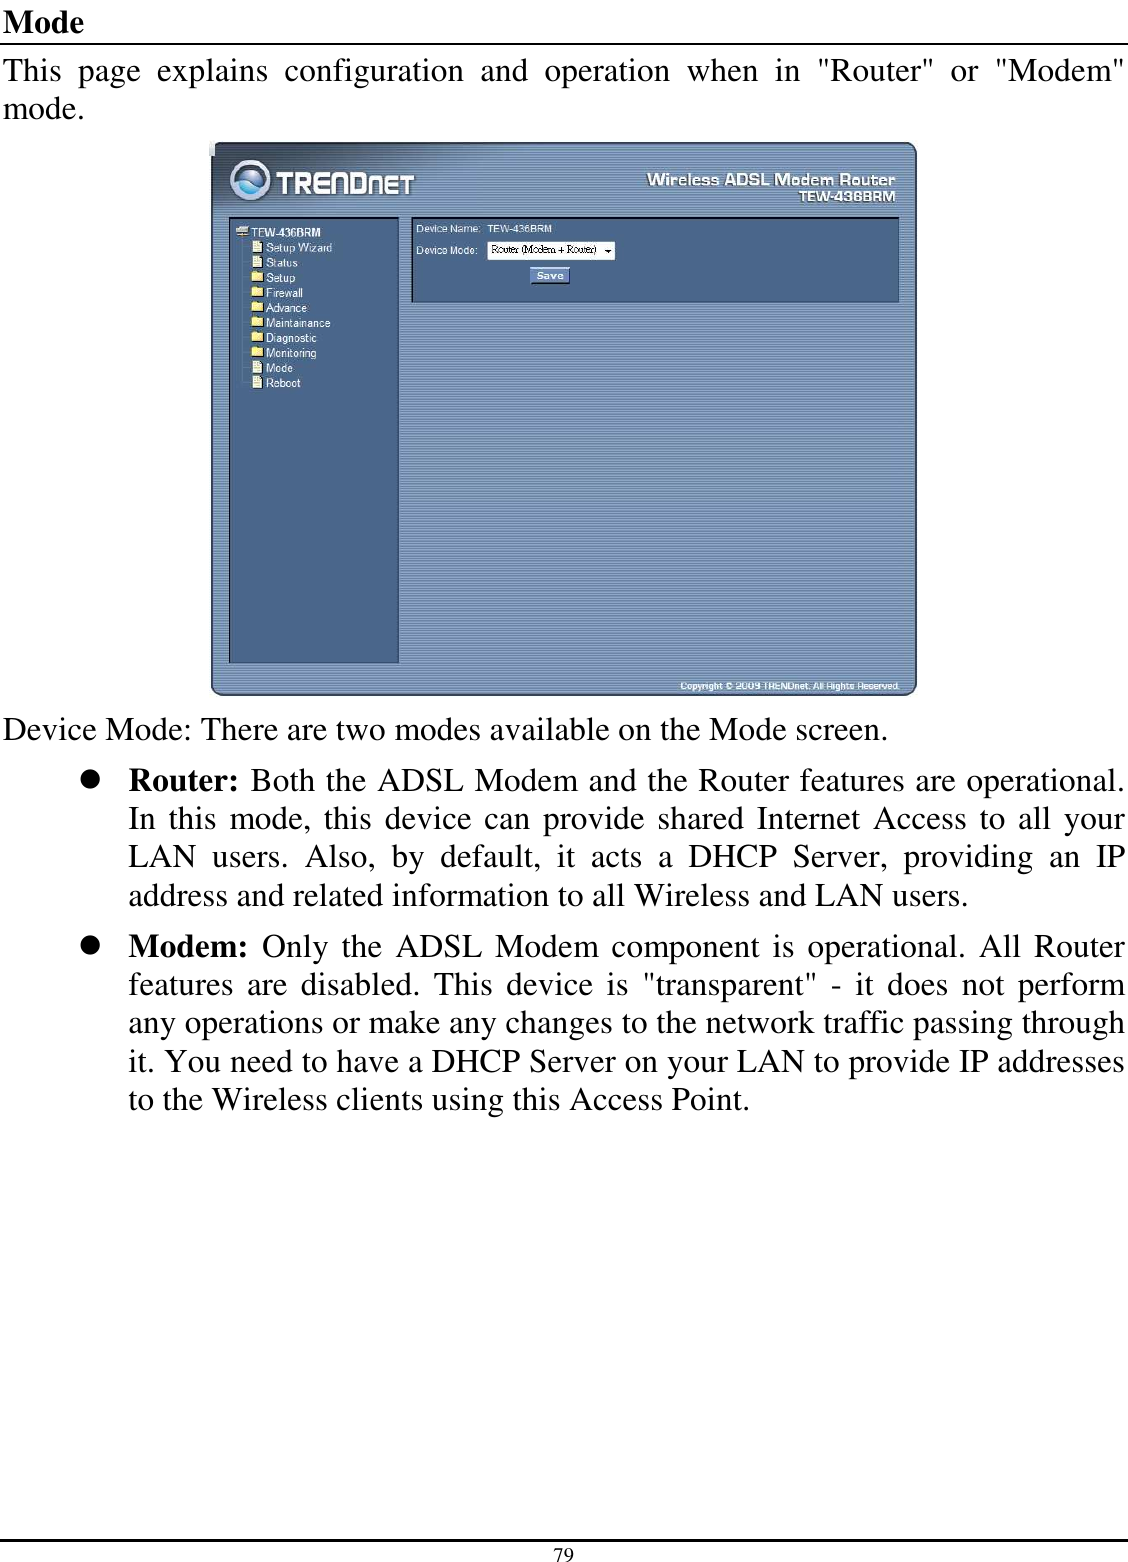 79 Mode This  page  explains  configuration  and  operation  when  in  &quot;Router&quot;  or  &quot;Modem&quot; mode.  Device Mode: There are two modes available on the Mode screen.  Router: Both the ADSL Modem and the Router features are operational. In this mode, this device can provide shared Internet Access to all your LAN  users.  Also,  by  default,  it  acts  a  DHCP  Server,  providing  an  IP address and related information to all Wireless and LAN users.  Modem:  Only the ADSL Modem component is operational. All Router features  are disabled.  This device  is  &quot;transparent&quot;  -  it  does not perform any operations or make any changes to the network traffic passing through it. You need to have a DHCP Server on your LAN to provide IP addresses to the Wireless clients using this Access Point. 